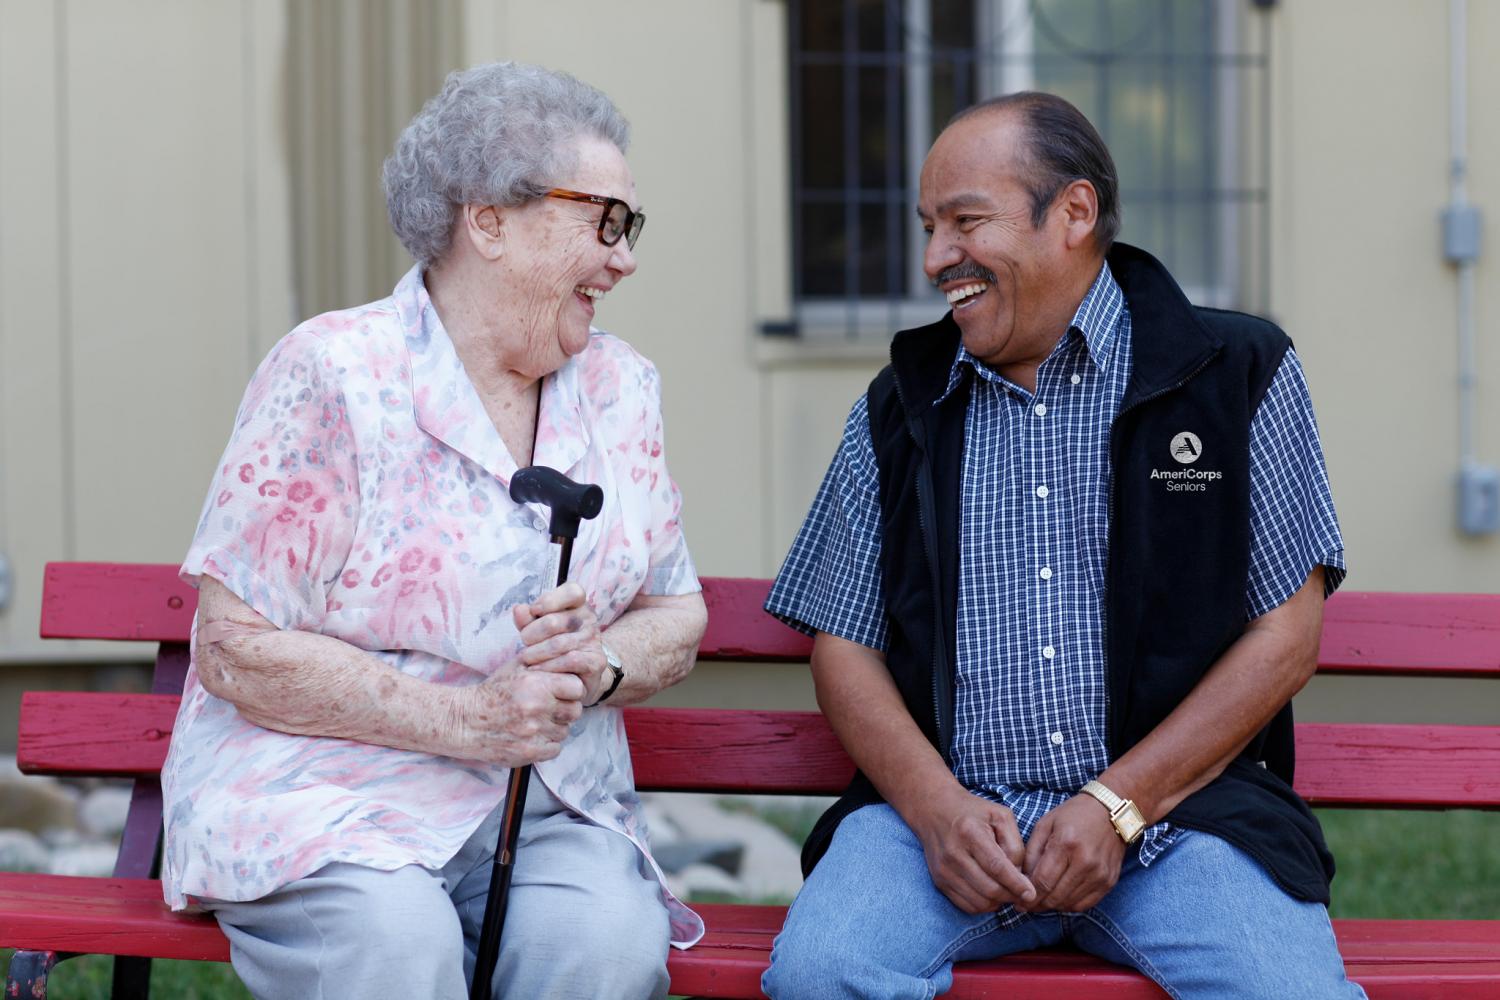 An AmeriCorps Seniors volunteer talks to a smiling woman